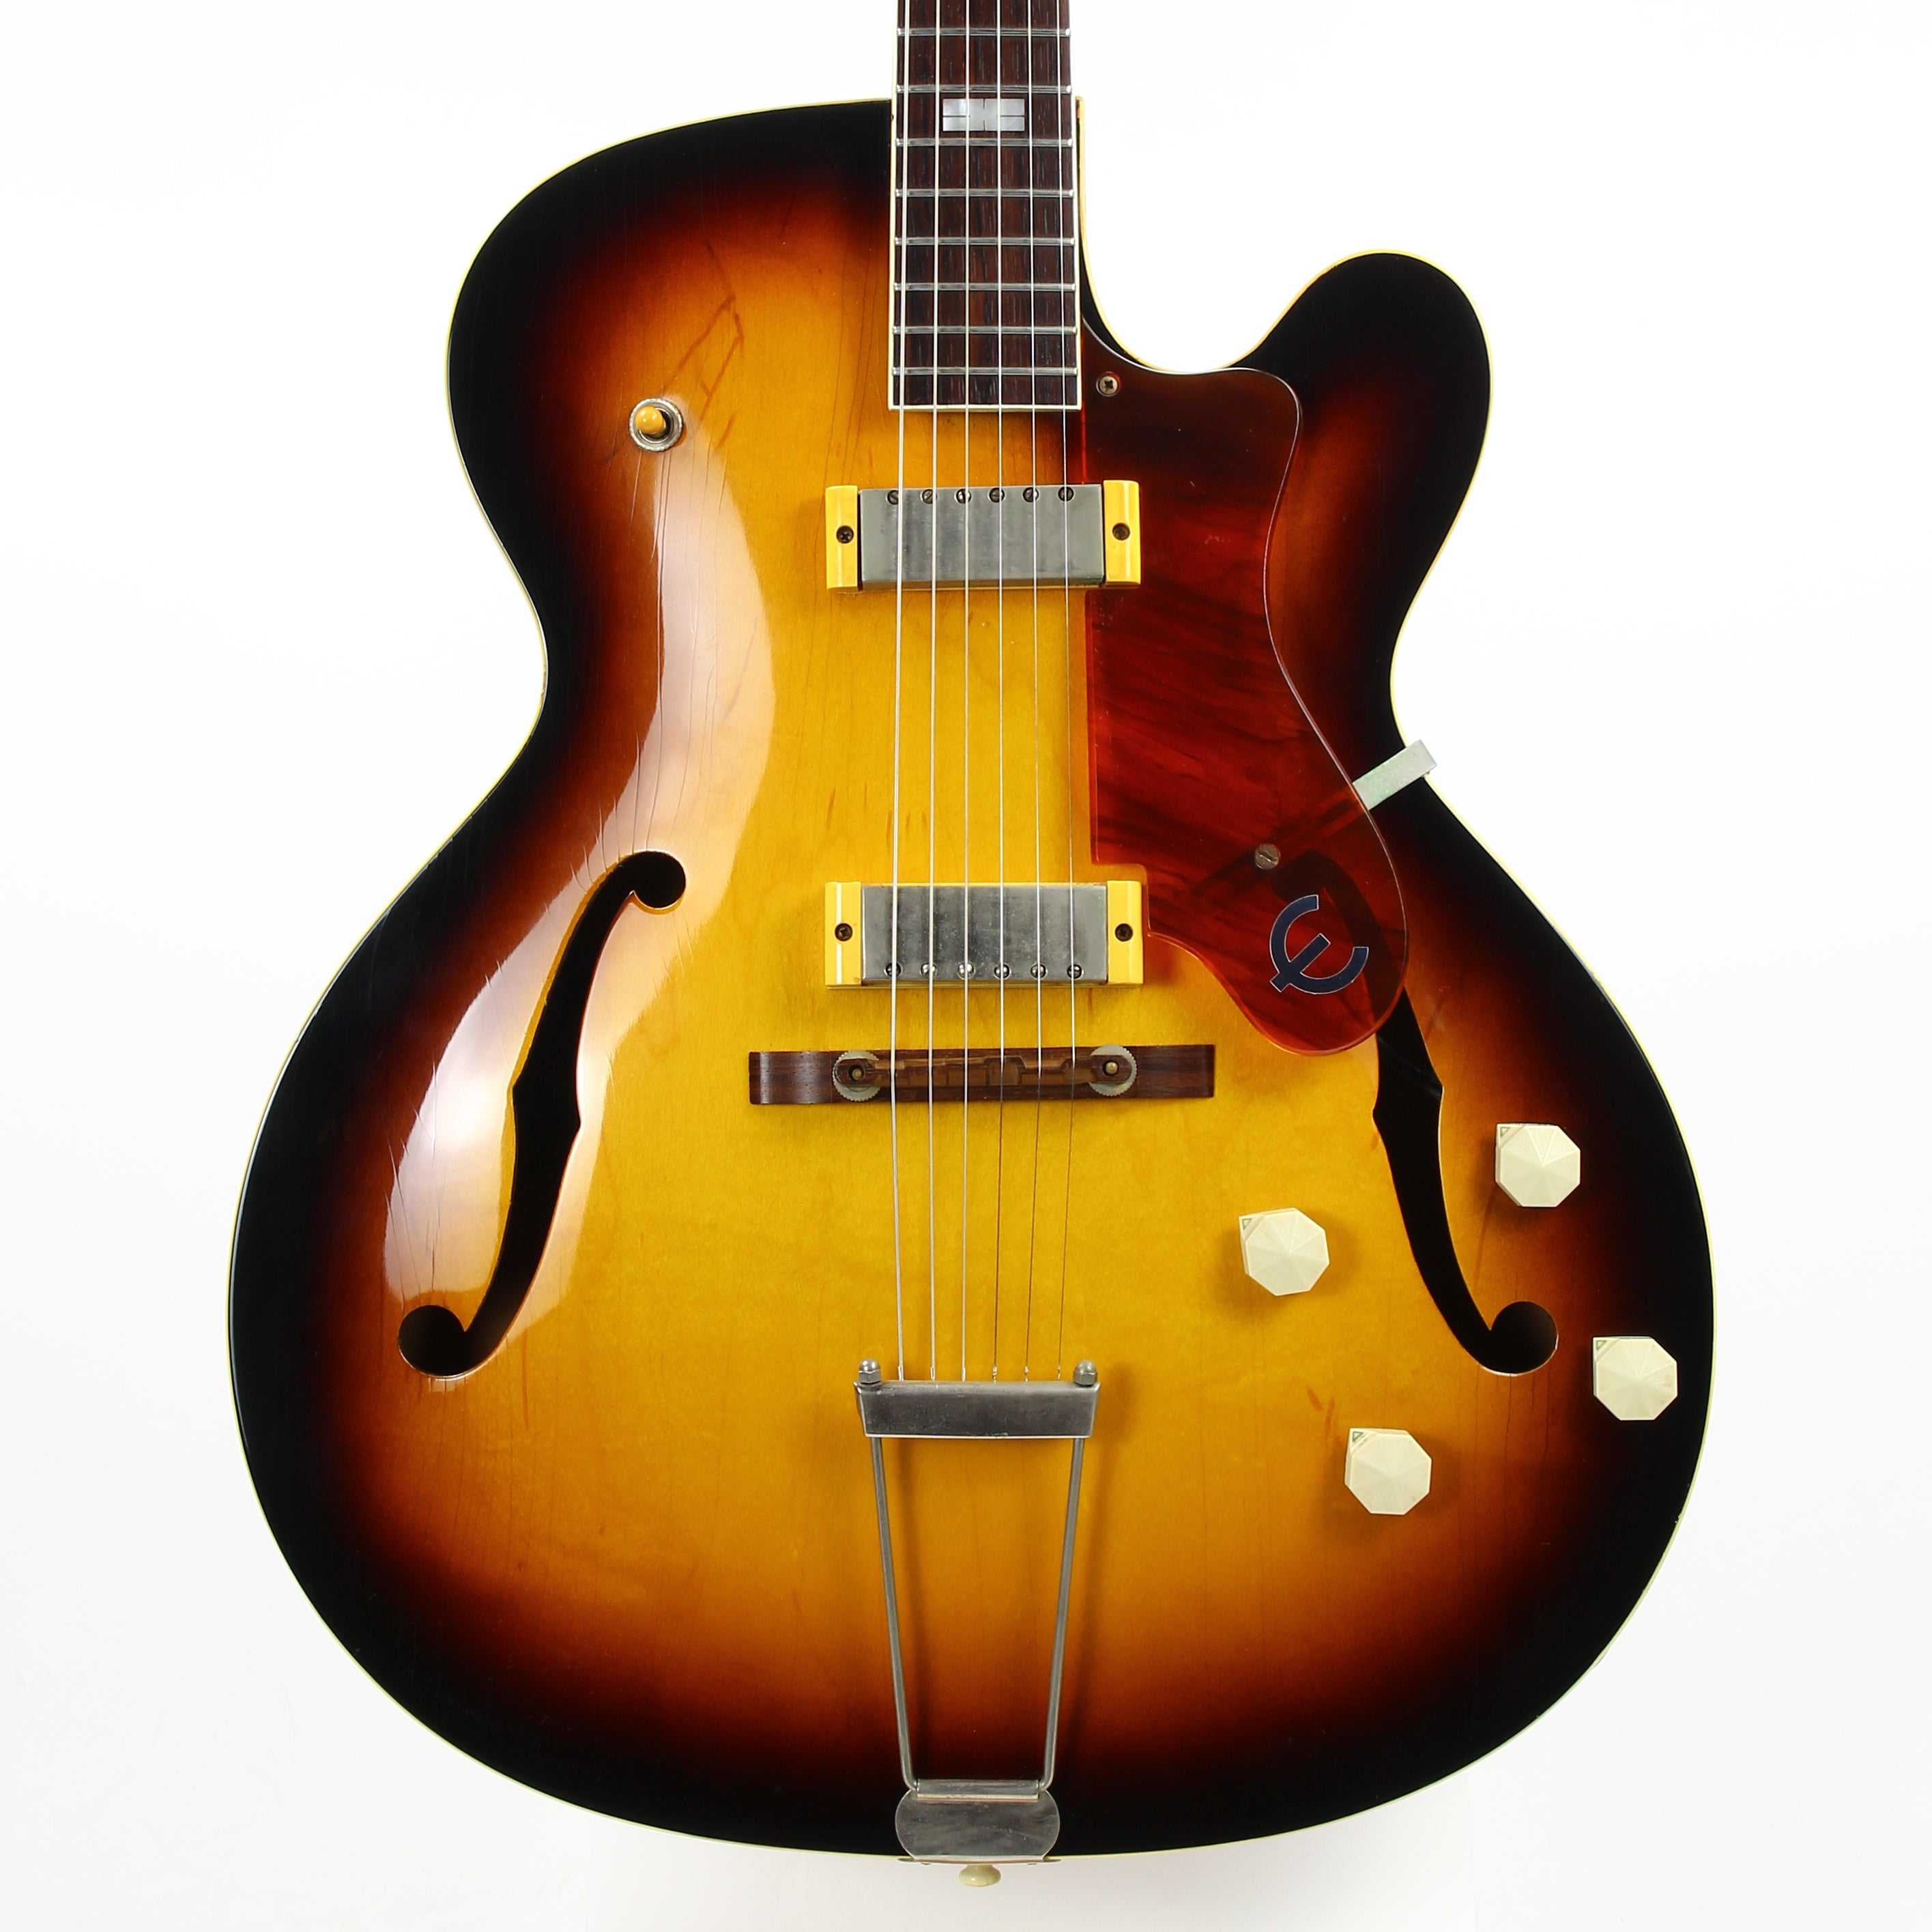 RARE 1958 Epiphone Gibson-Made Zephyr Regent Thinline E312T Electric - 2 New York Pickups, Cutaway